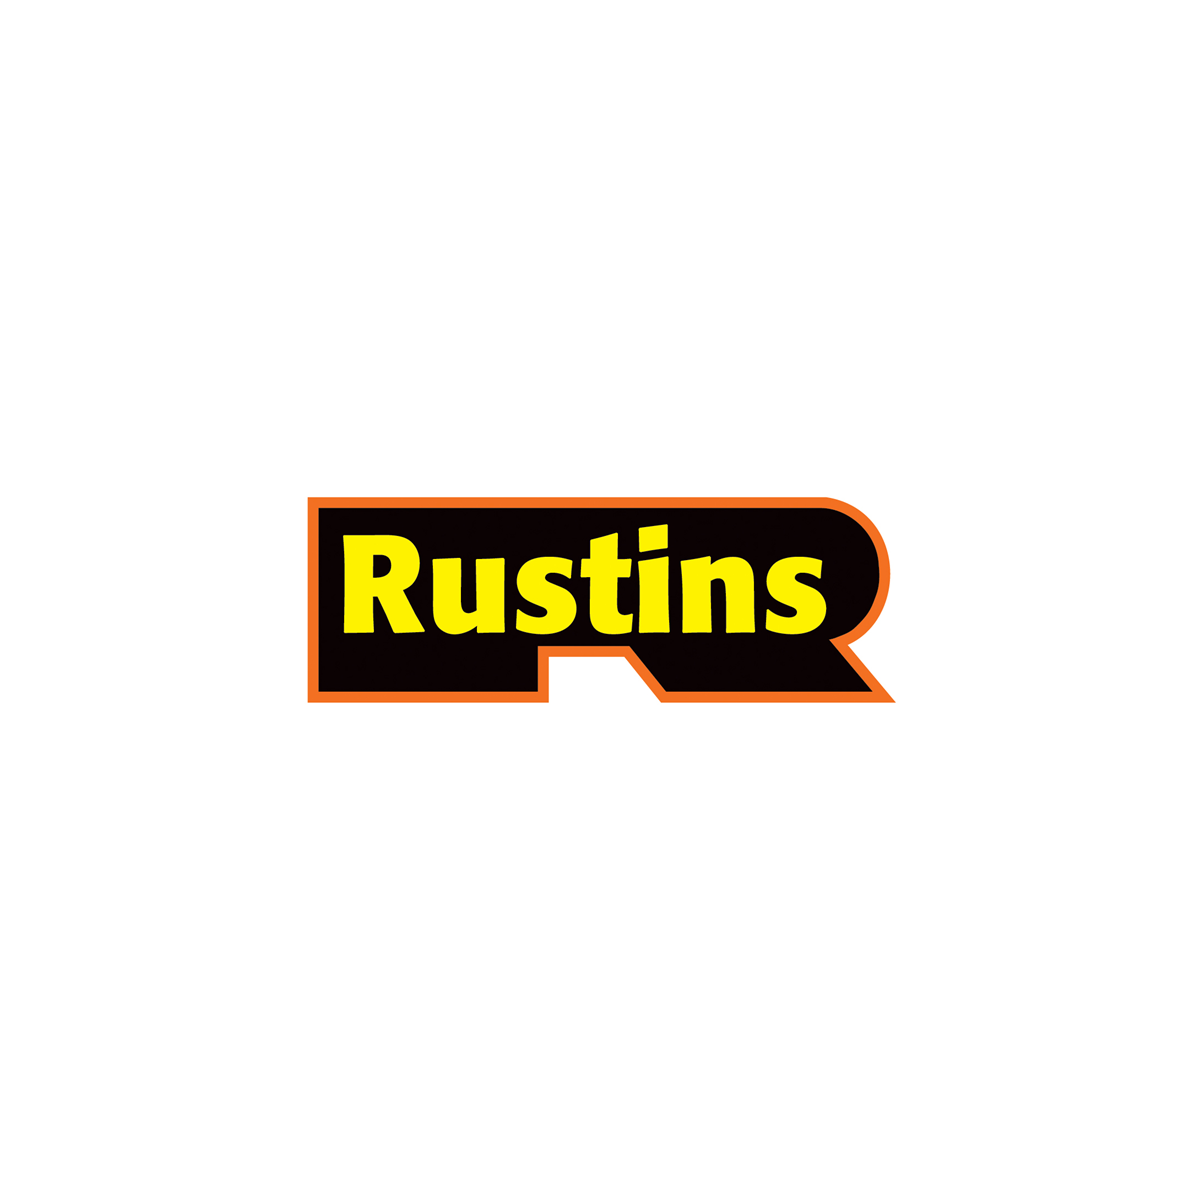 Where to buy Rustins Outdoor Wood Stain